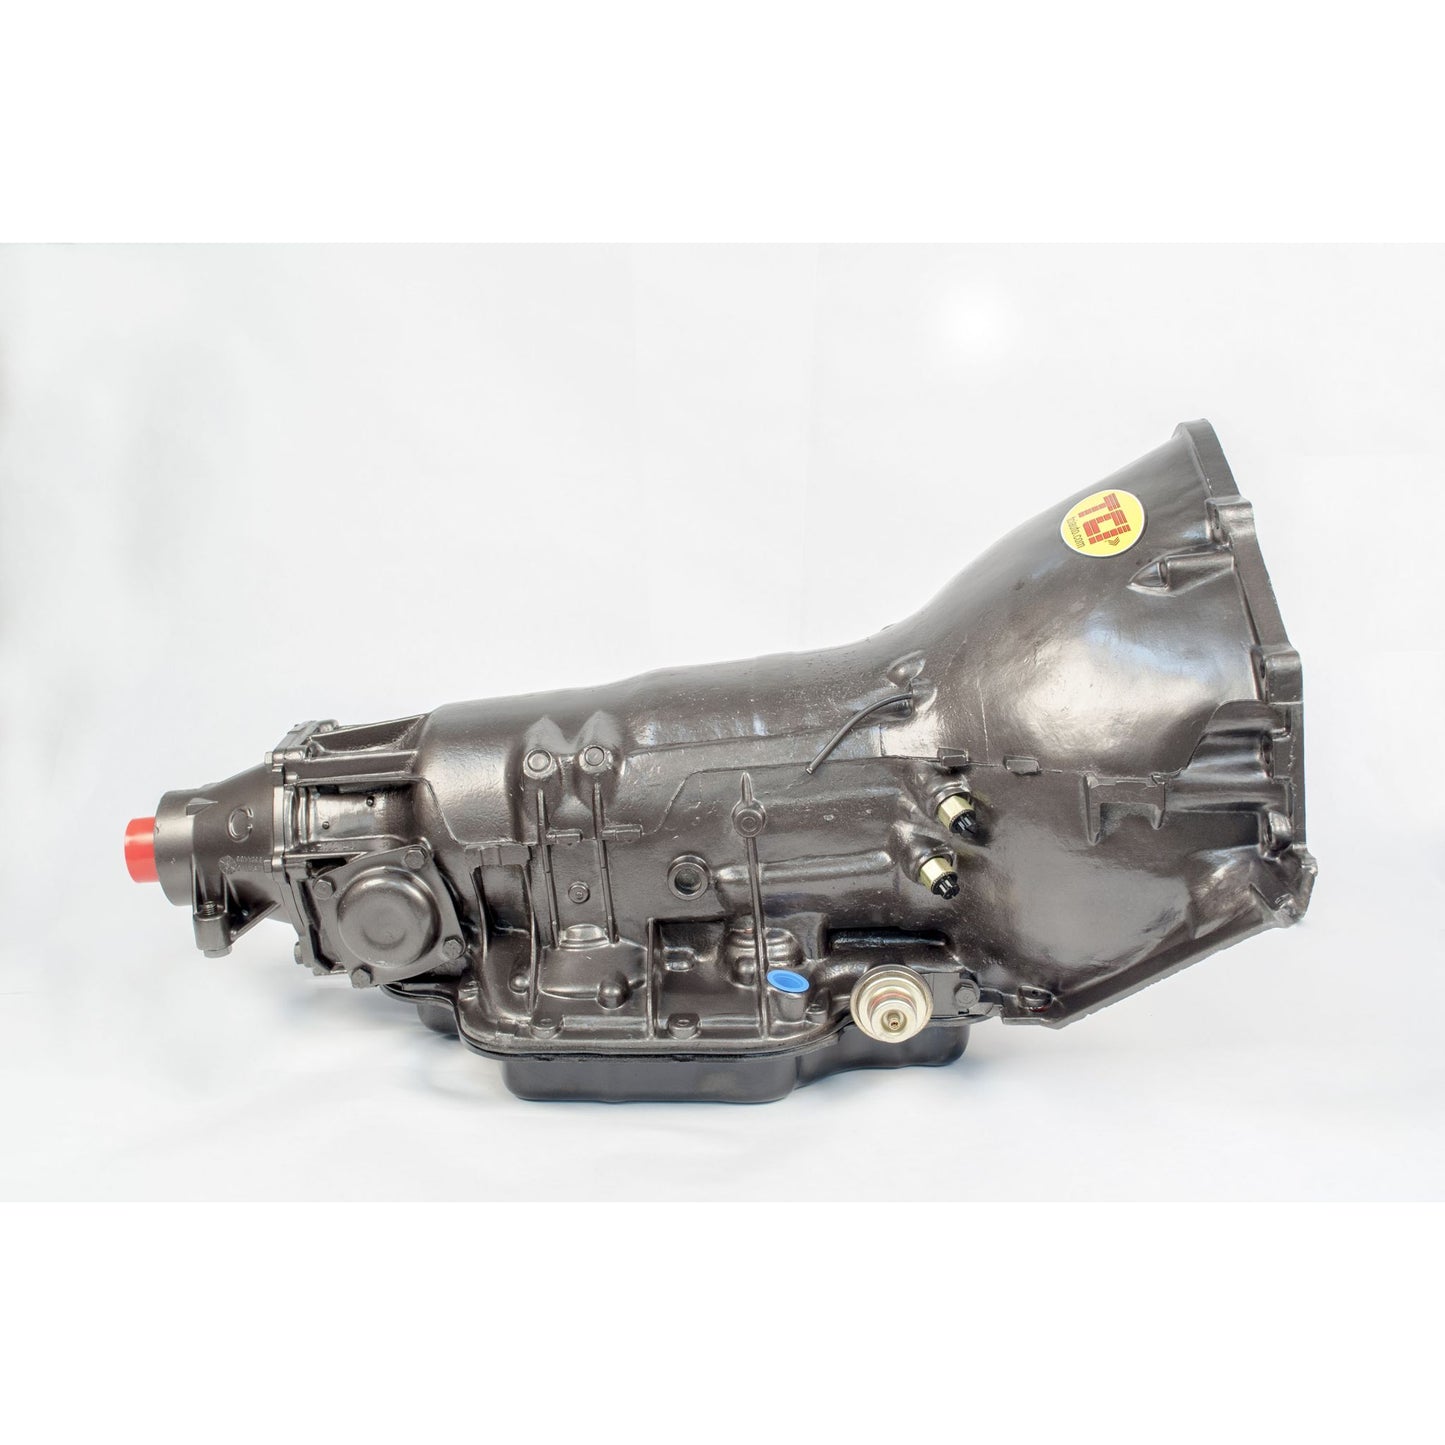 TCI TH400 Full Manual Competition Transmission w/ Reverse Shift Pattern 212015